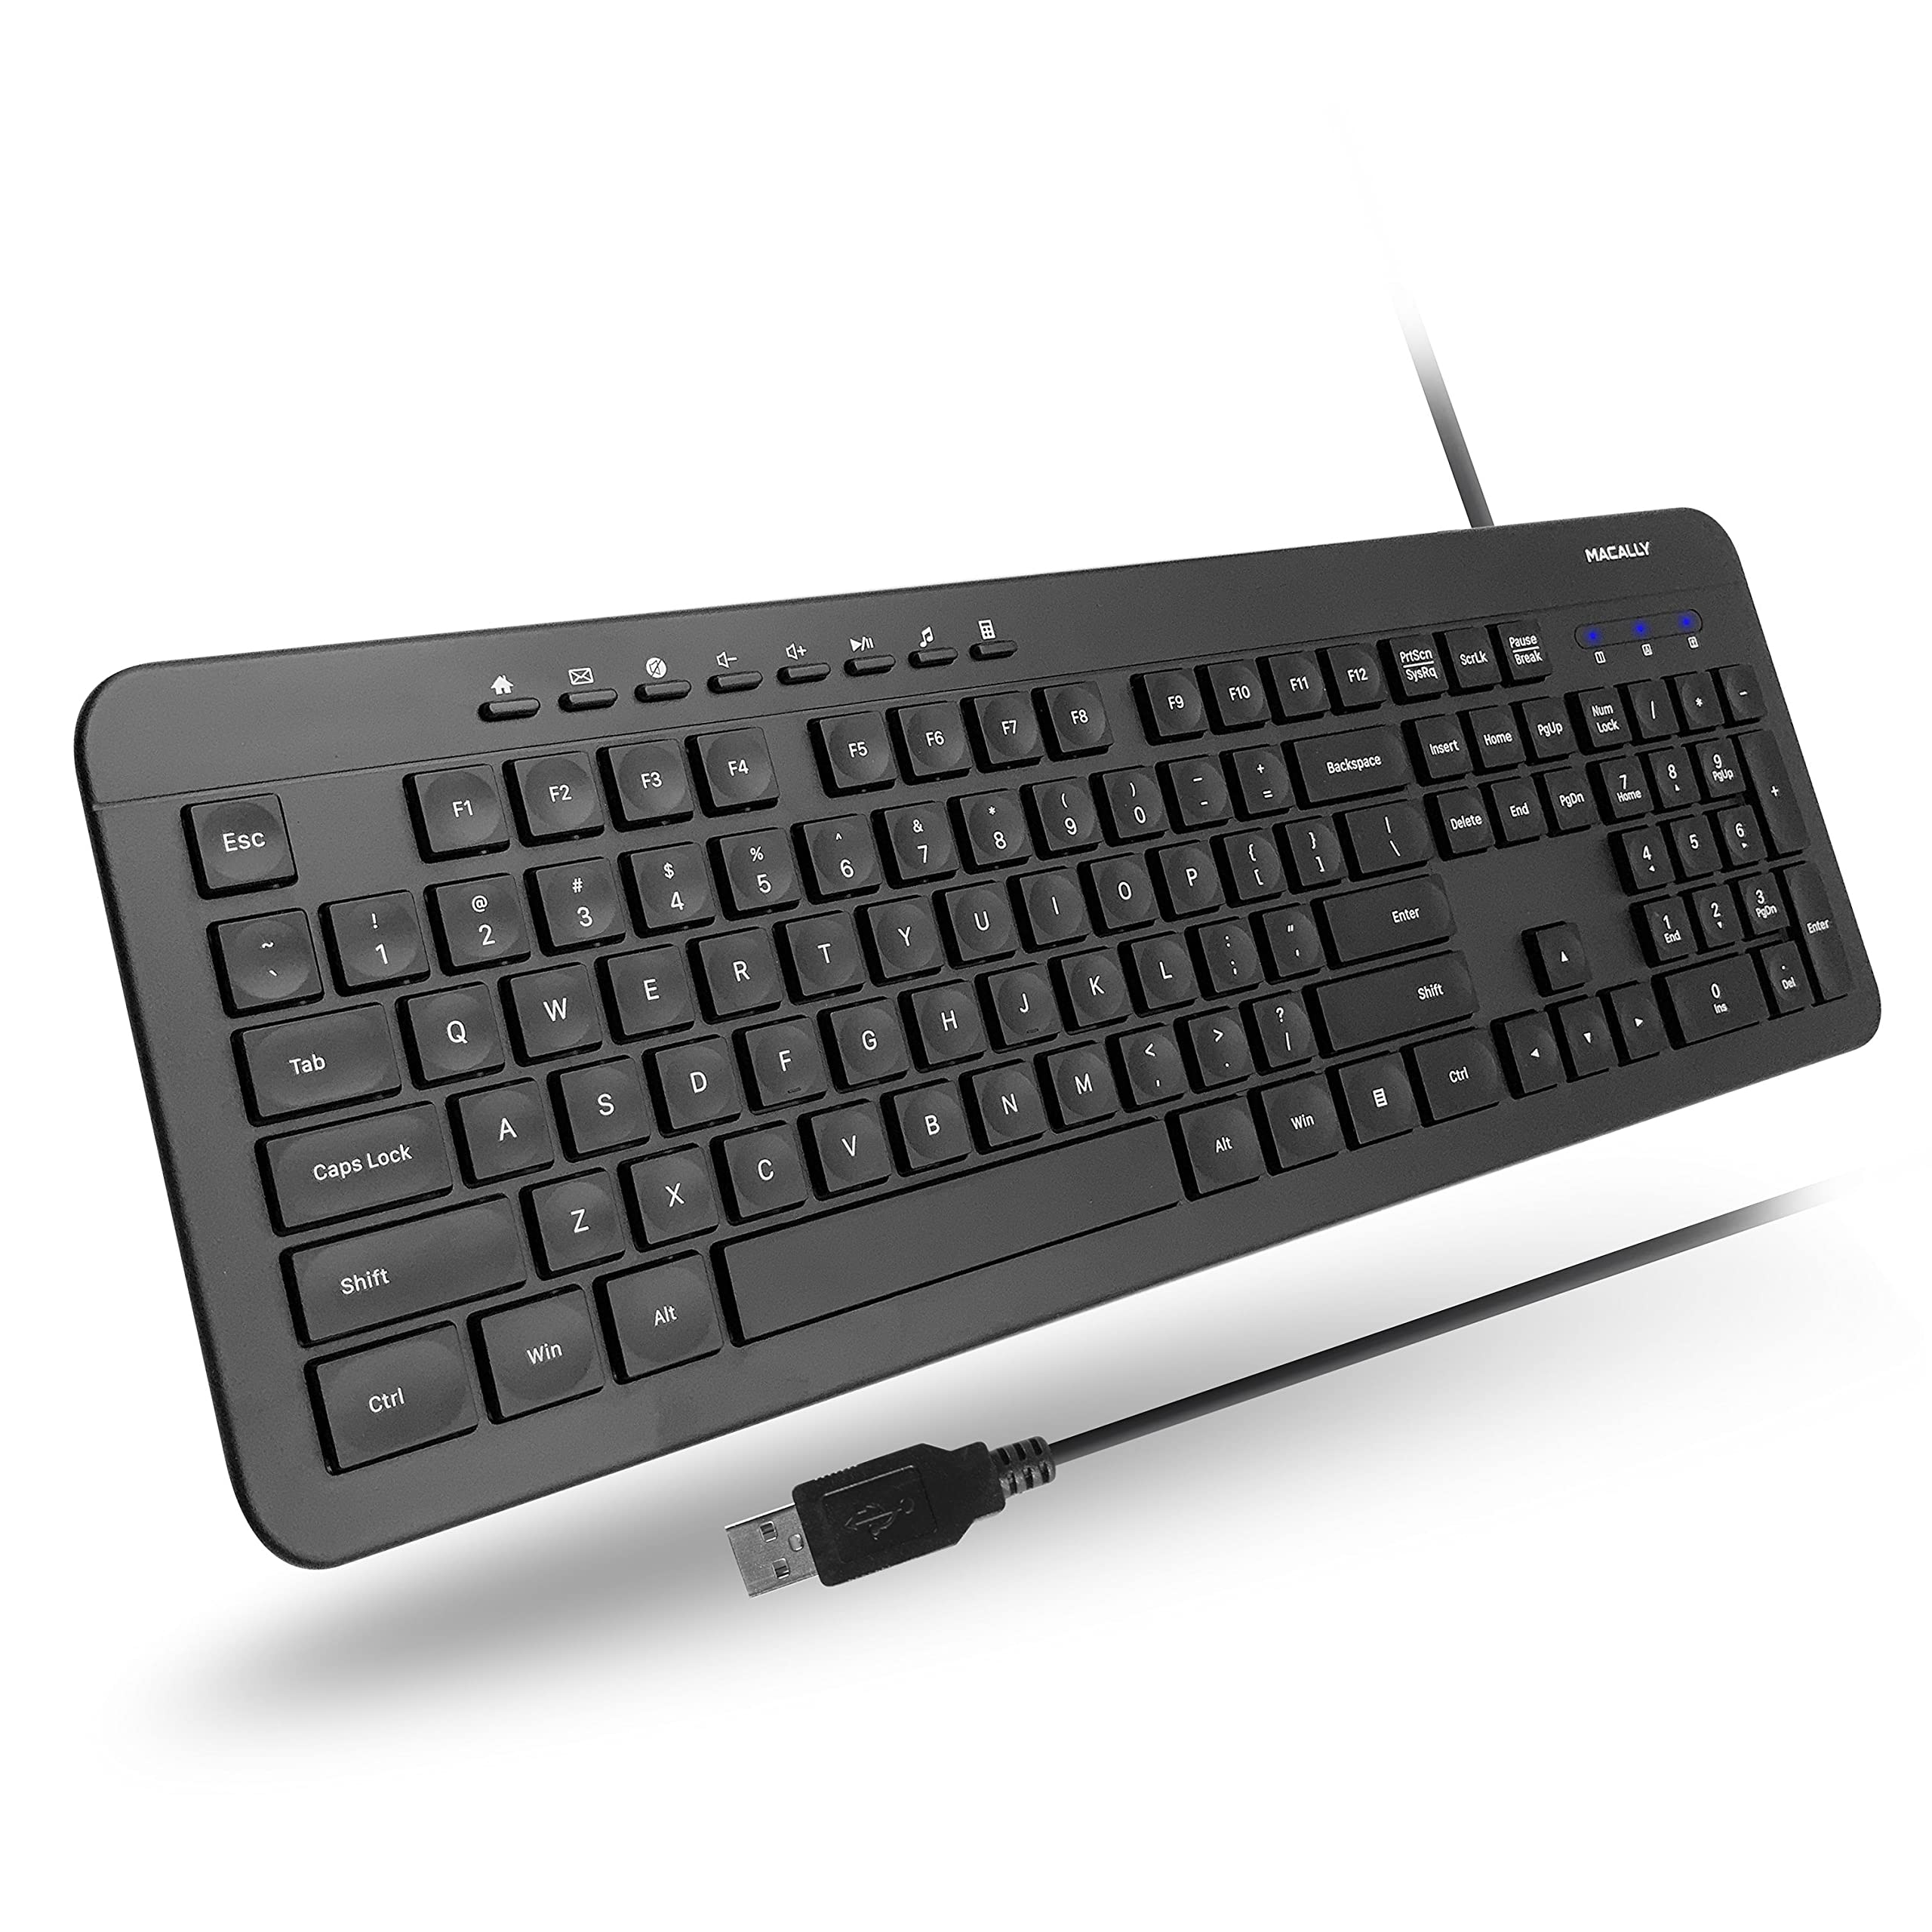 Macally Wired Keyboard, Full Sized Ergonomic Computer Keyboard Wired - Slim External Keyboard for Laptop and Desktop - USB Keyboard with Numeric Keypad - Windows PC Keyboard for Office and Home